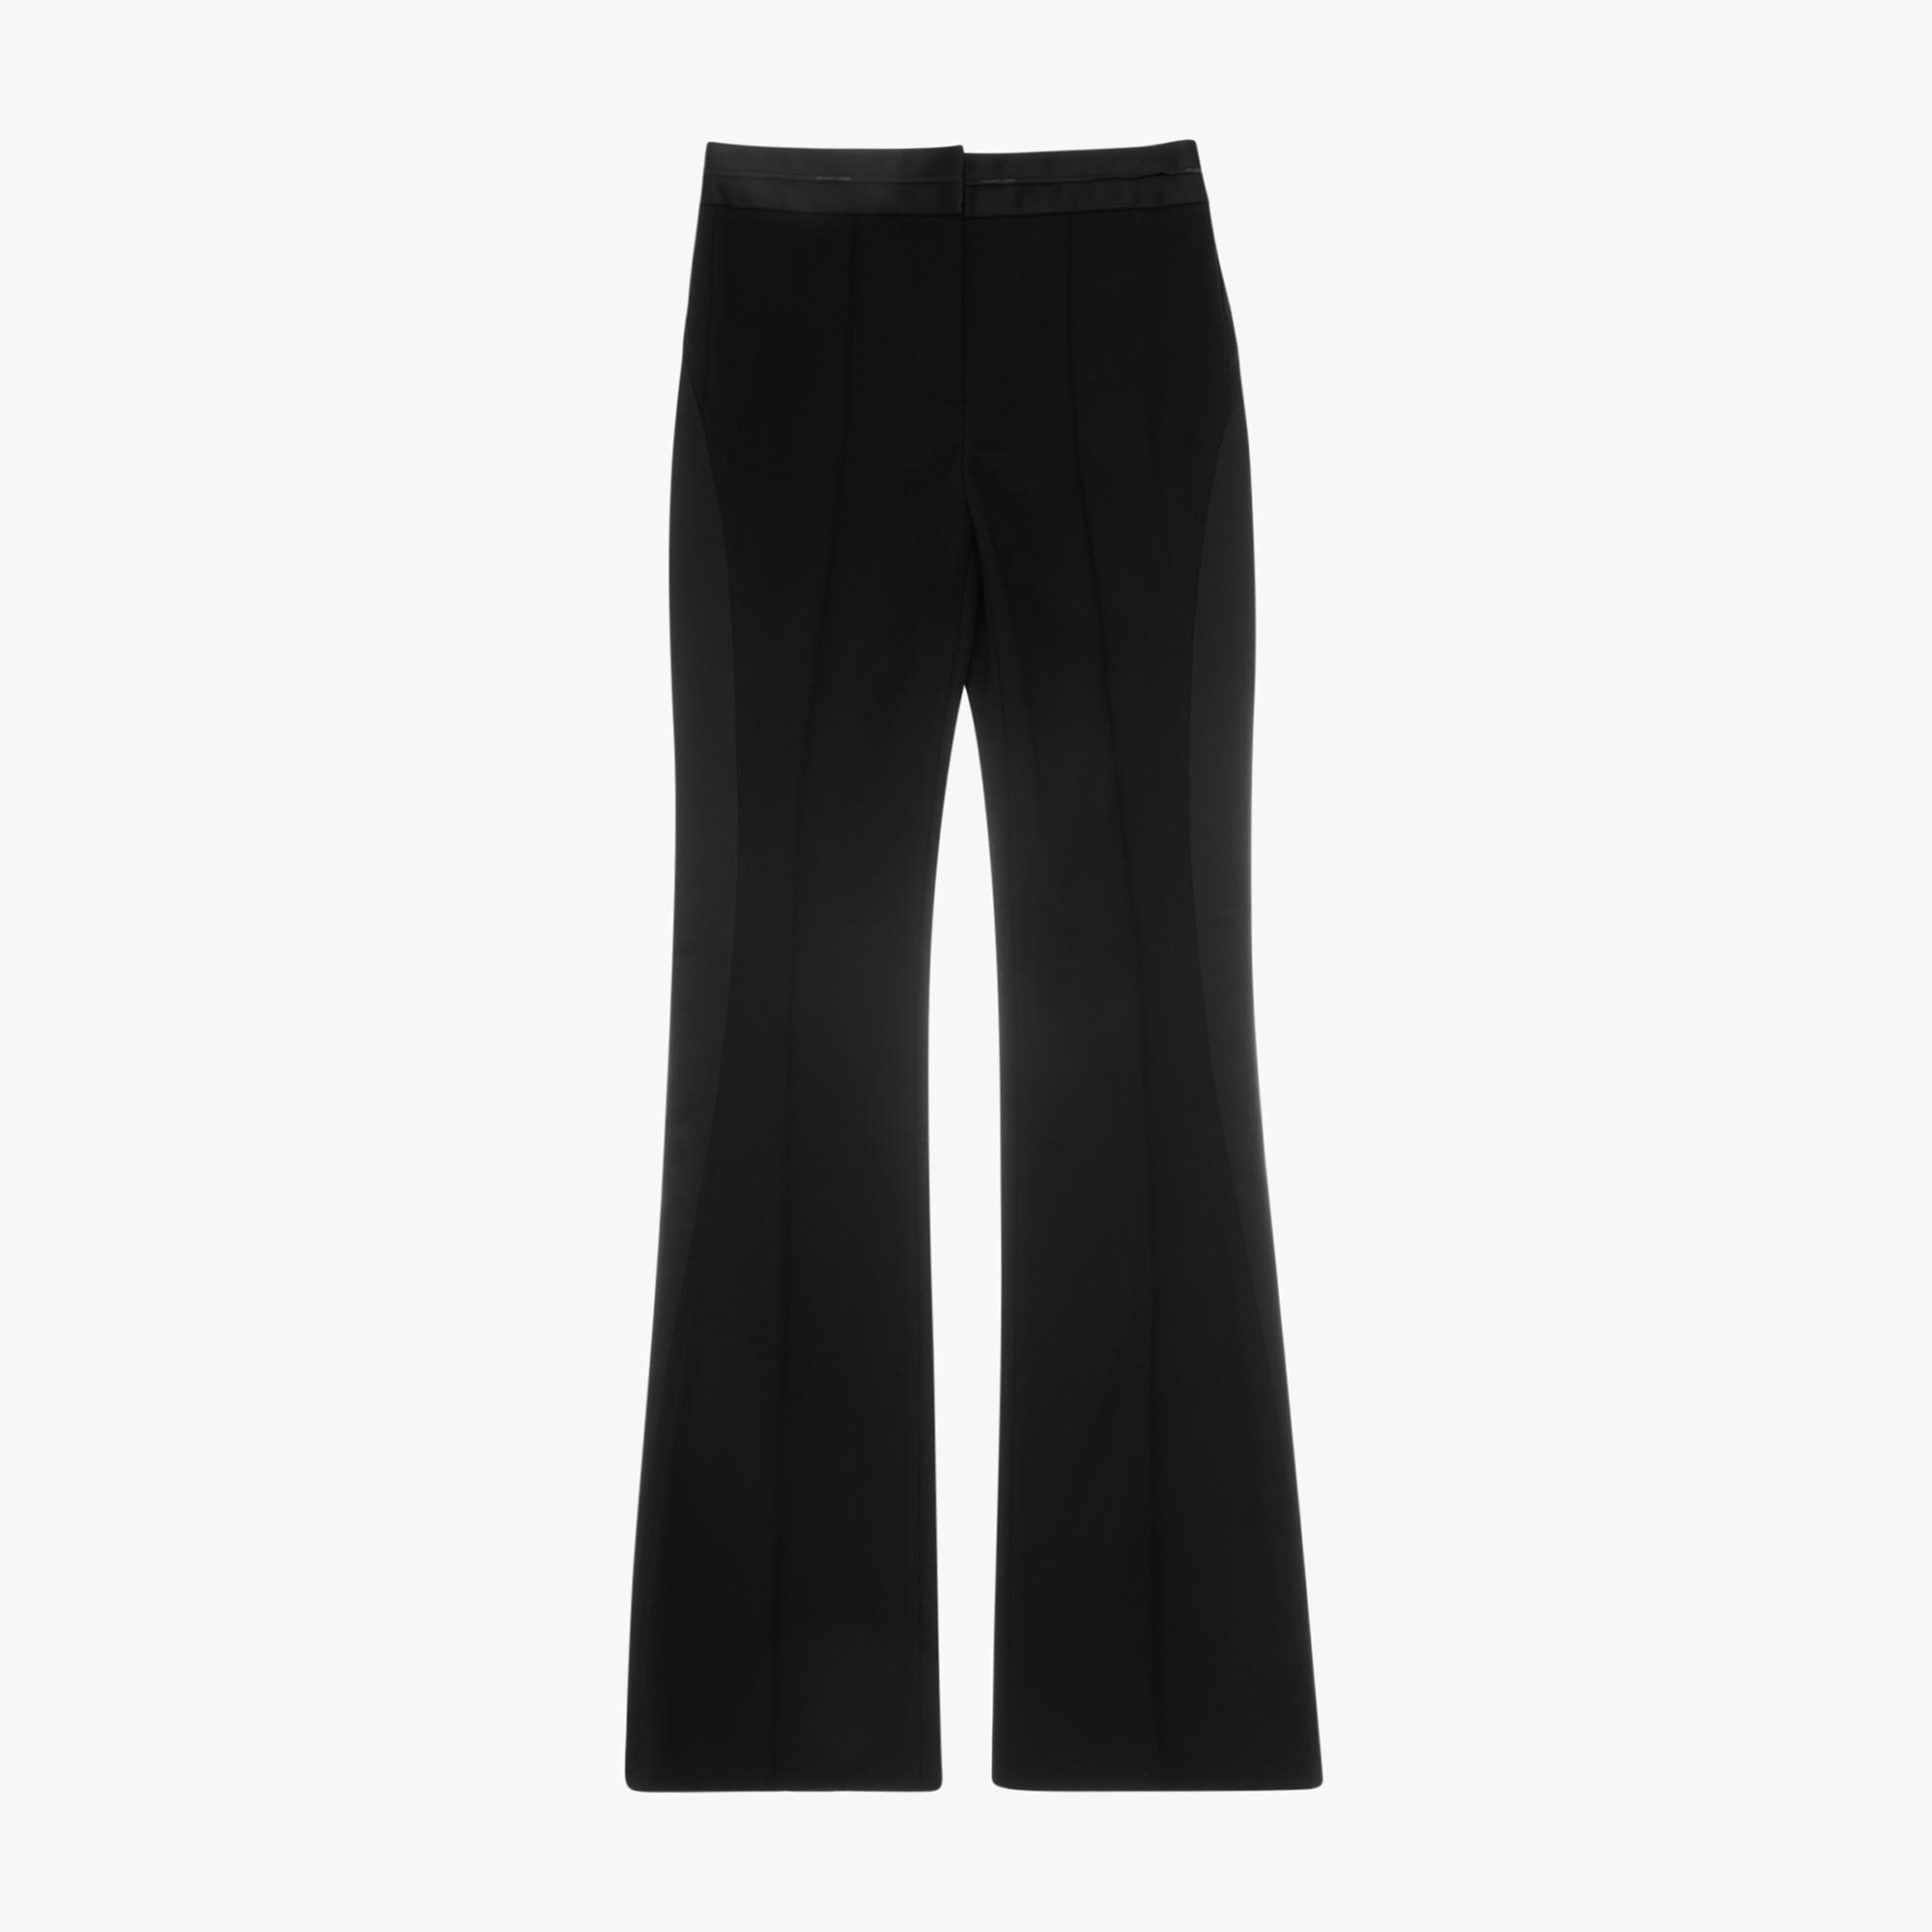 SEAMED BOOTCUT PANT - 1